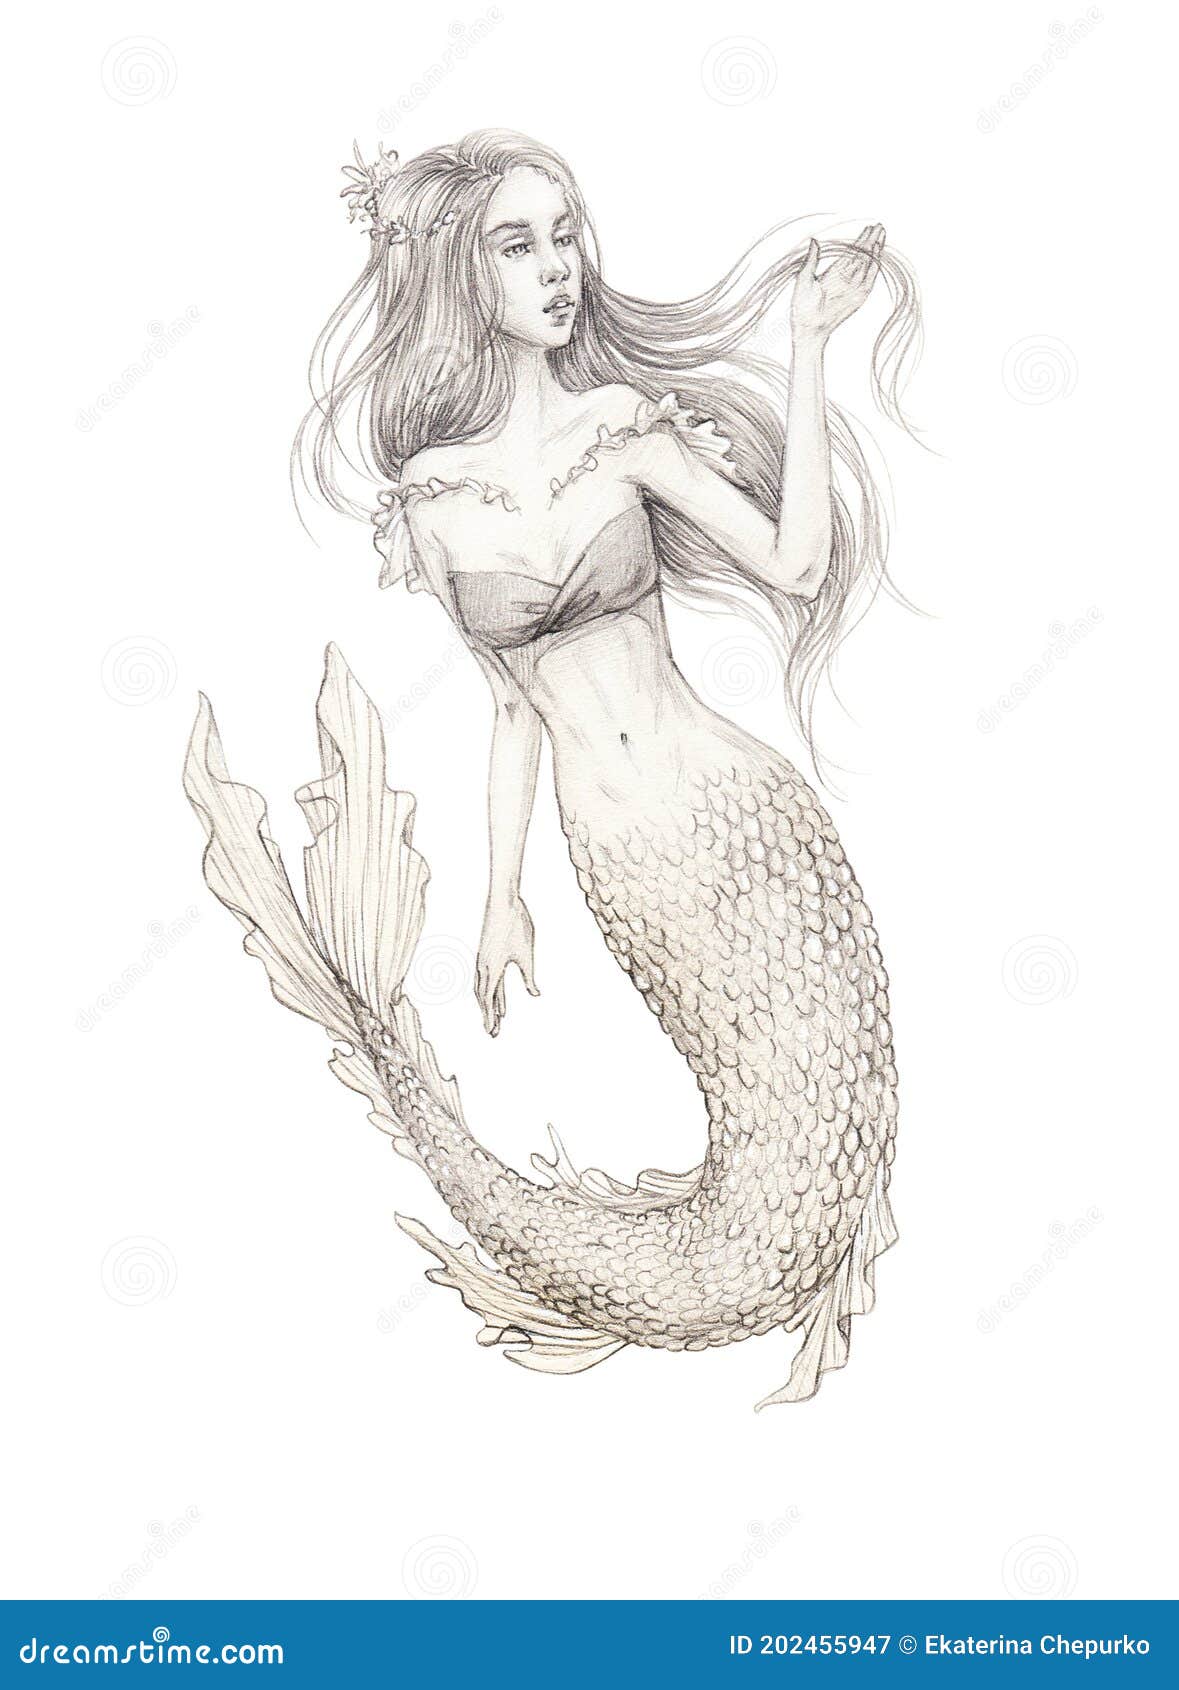 Mermaid Girl with Long Straight Hair with Scales on Her Tail and Fins  Fantasy Image Pencil Drawing Stock Image - Image of gentle, pencil:  202455947